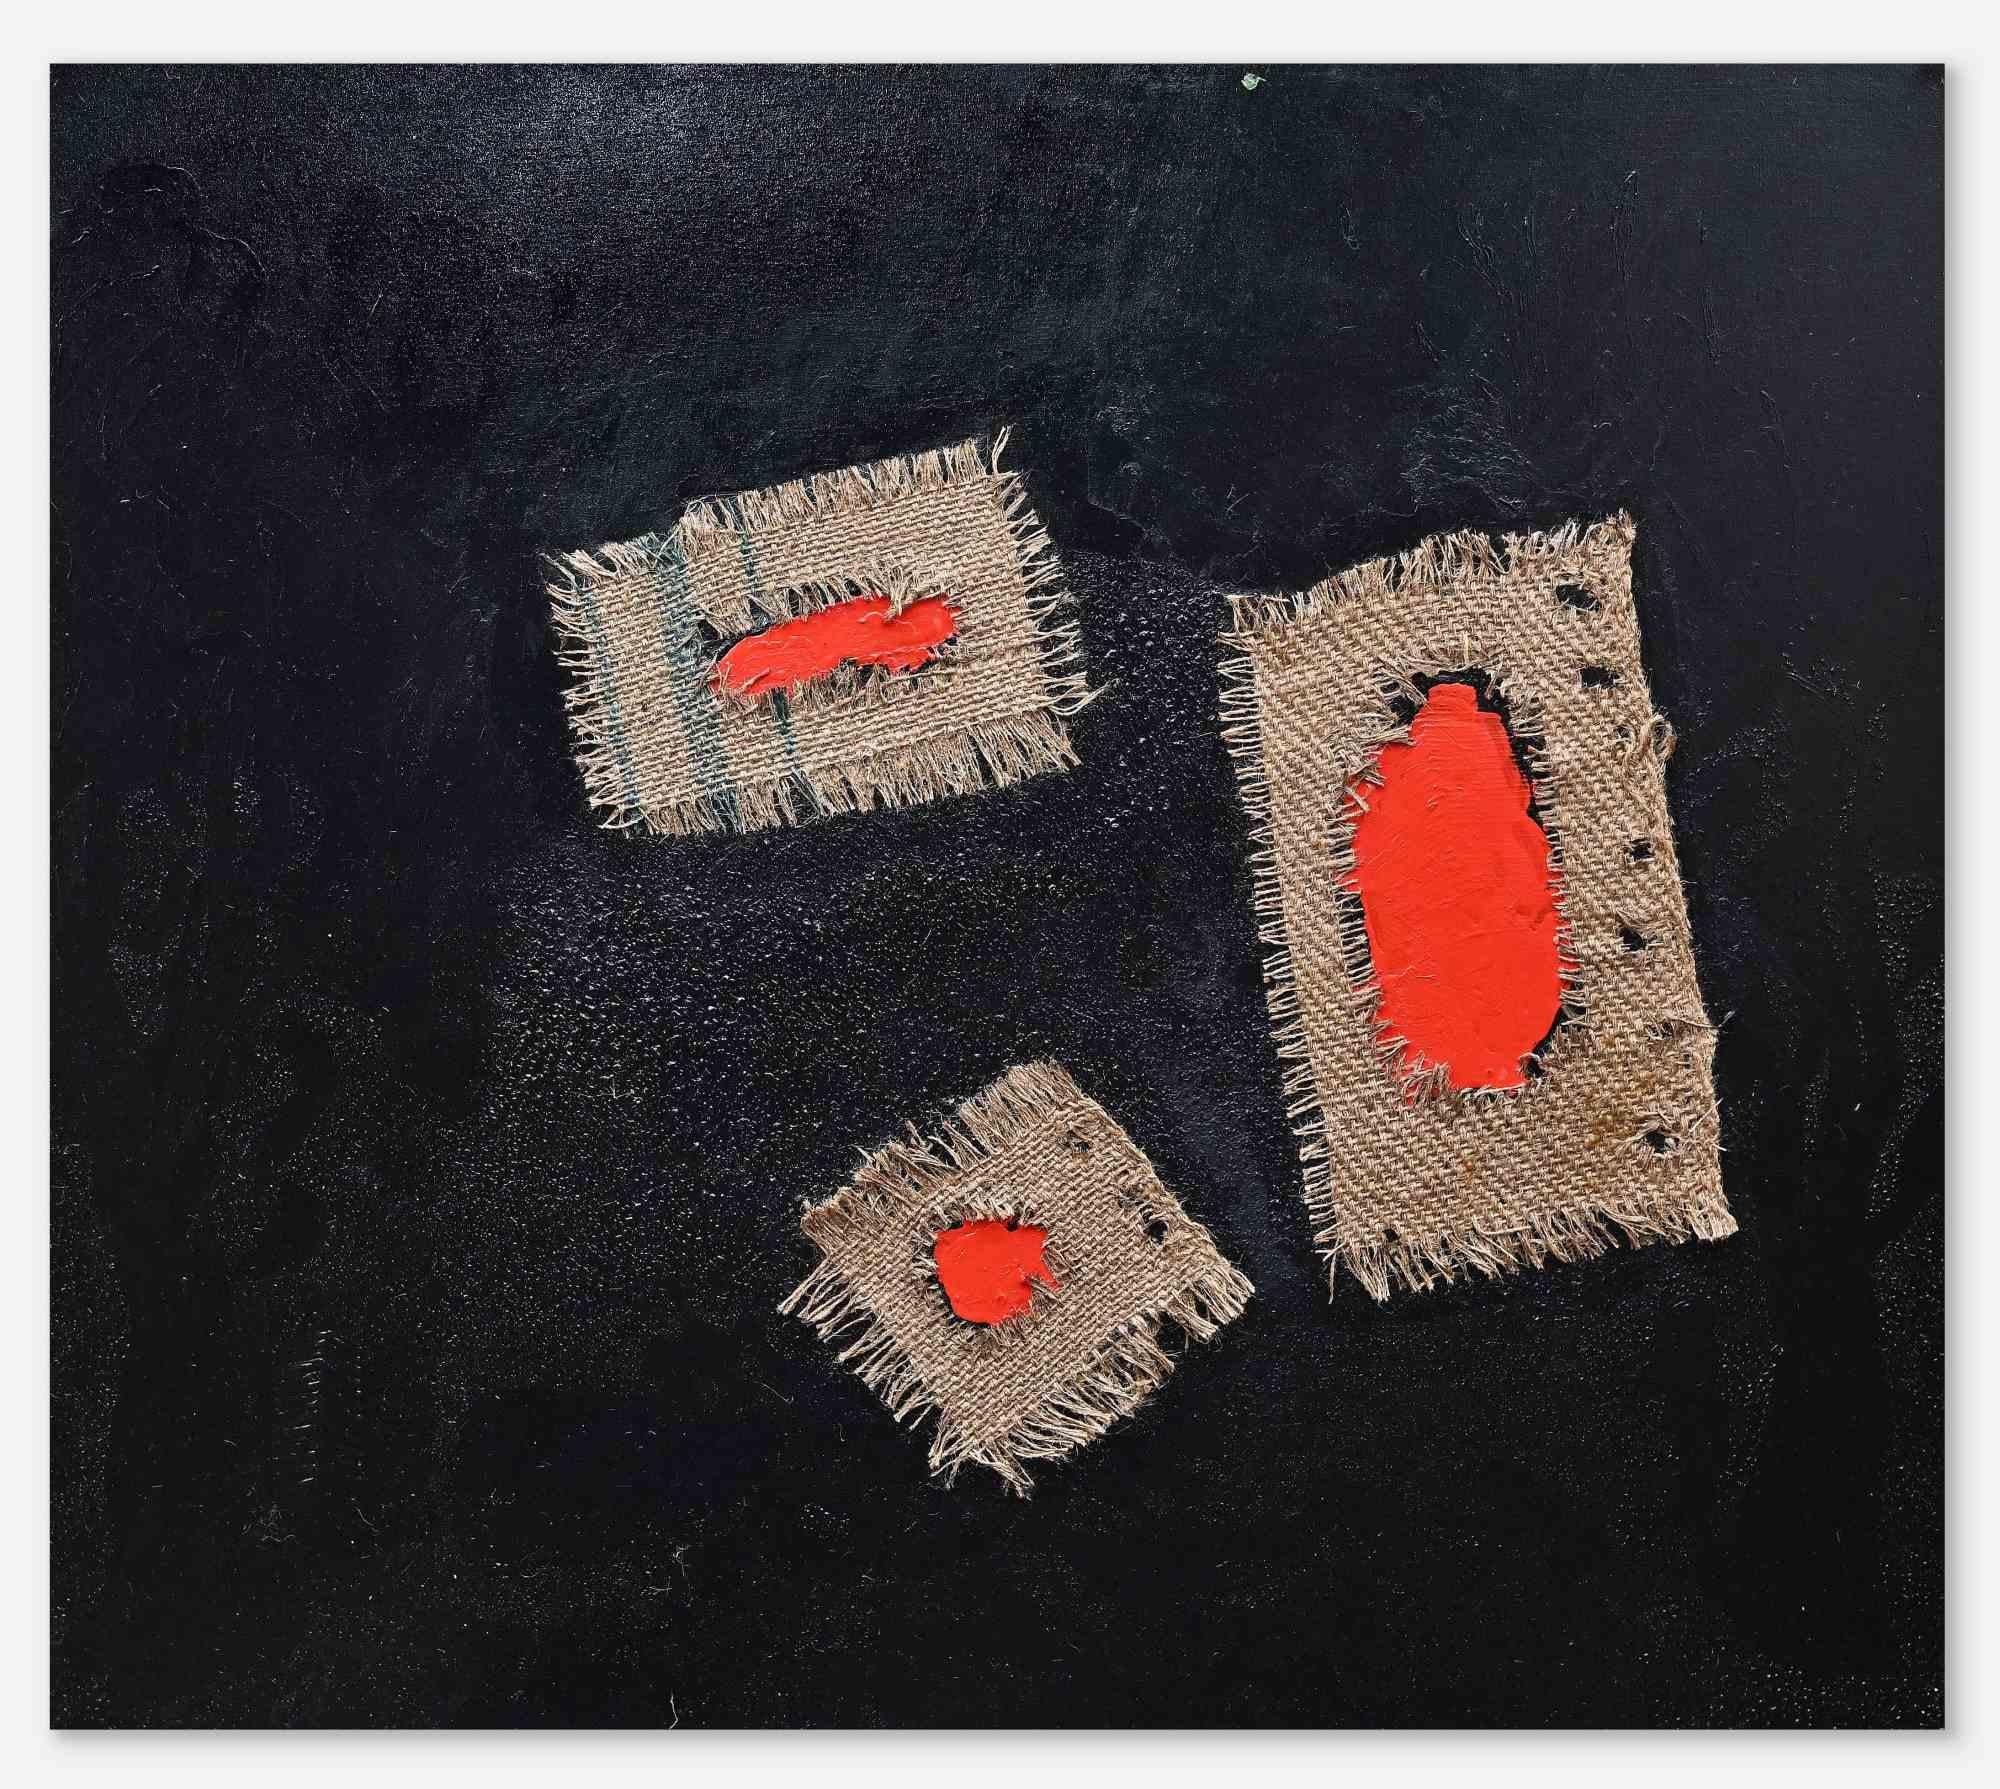 Hommage to Burri is an original artwork realized by Giorgio Lo Fermo (b. 1947) in 2022.

Original Oil Painting on Canvas.

Hand-signed, titled and dated on the back of the canvas.

Good conditions.

Includes frame

Giorgio Lo Fermo is an Italian